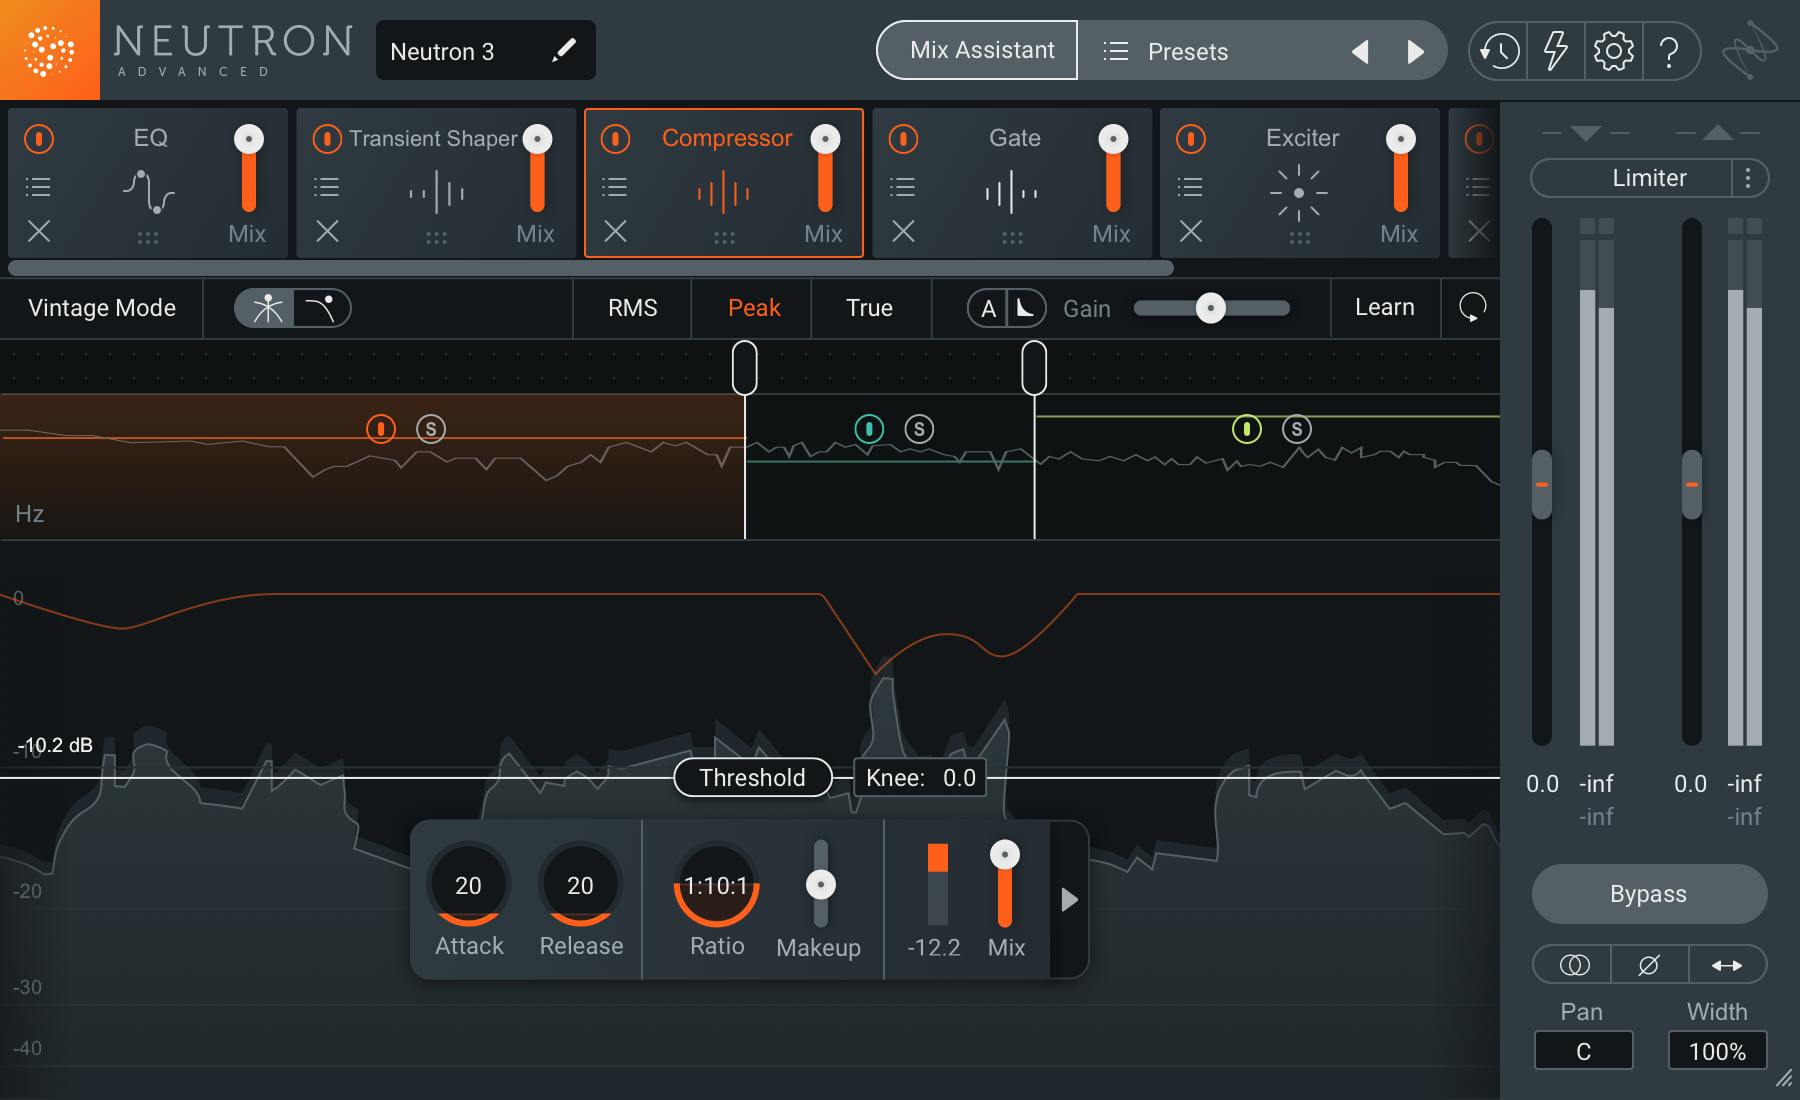 download the new version for ipod iZotope Tonal Balance Control 2.7.0